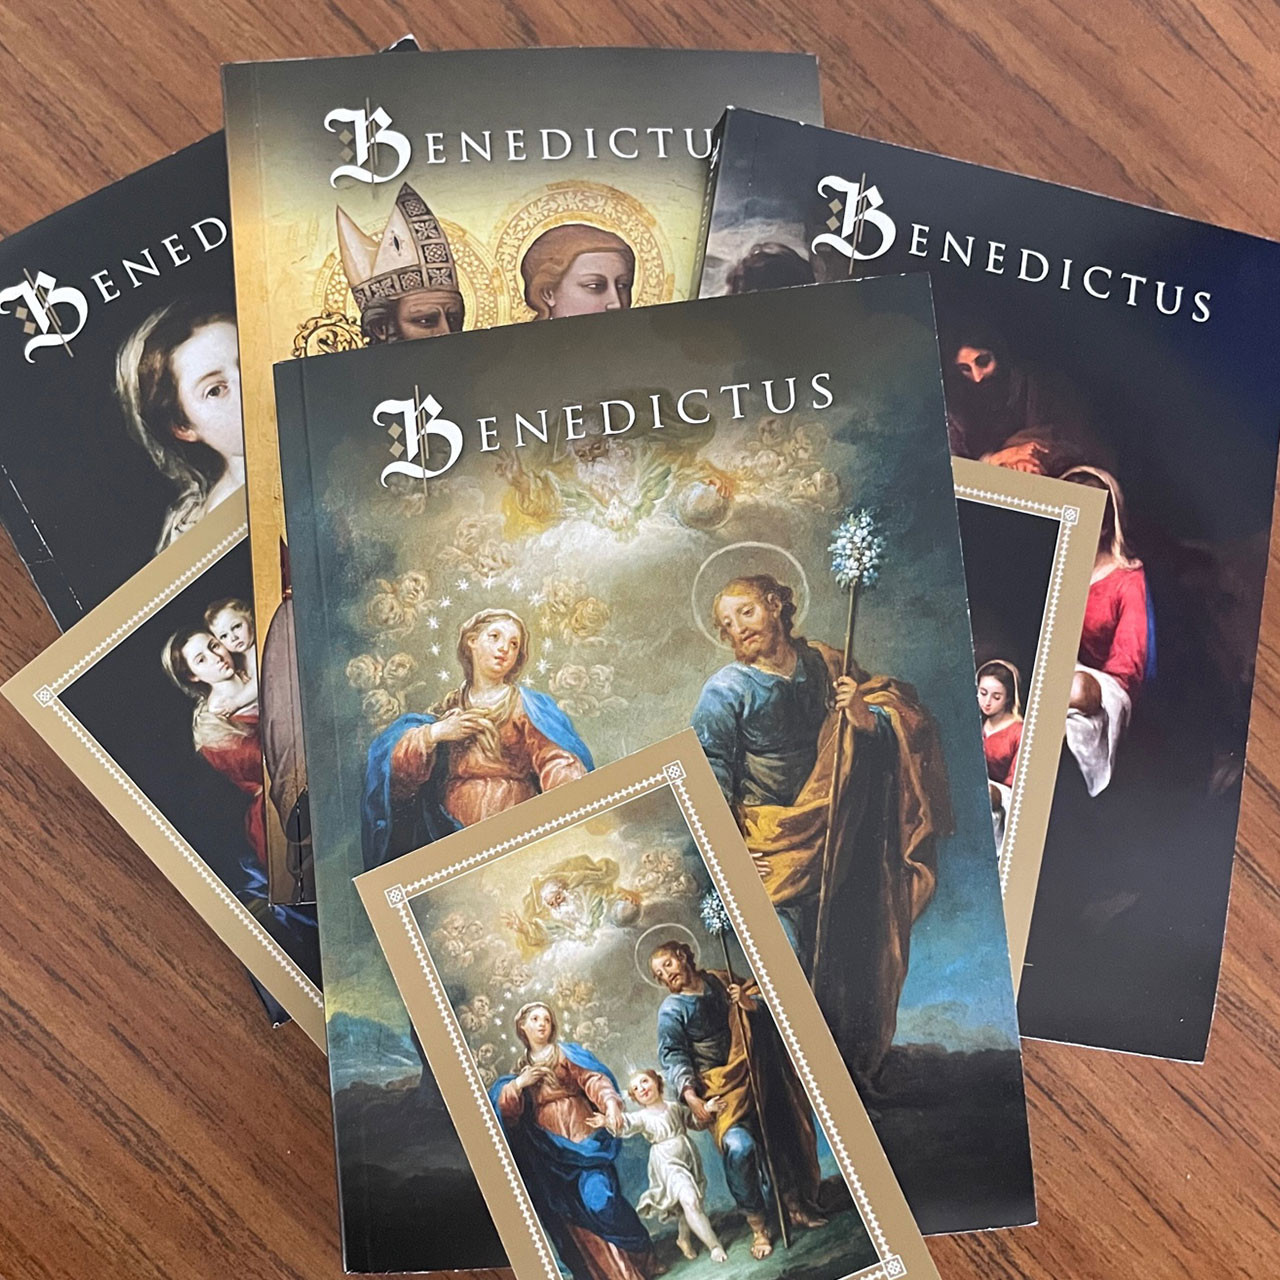 Benedictus - a monthly publication - sold per month